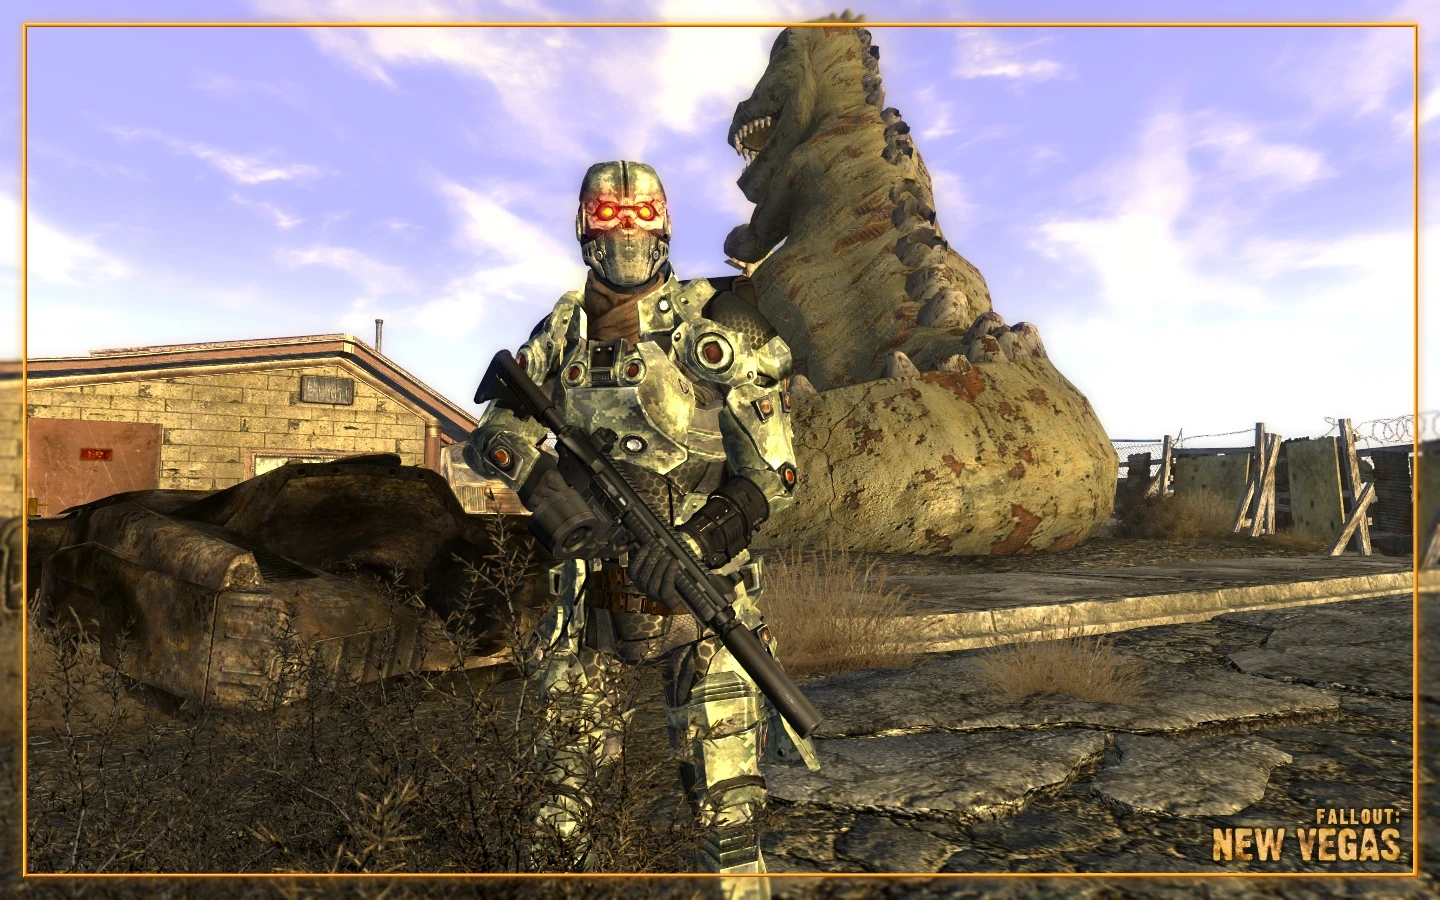 Chinese stealth armor fallout new vegas location